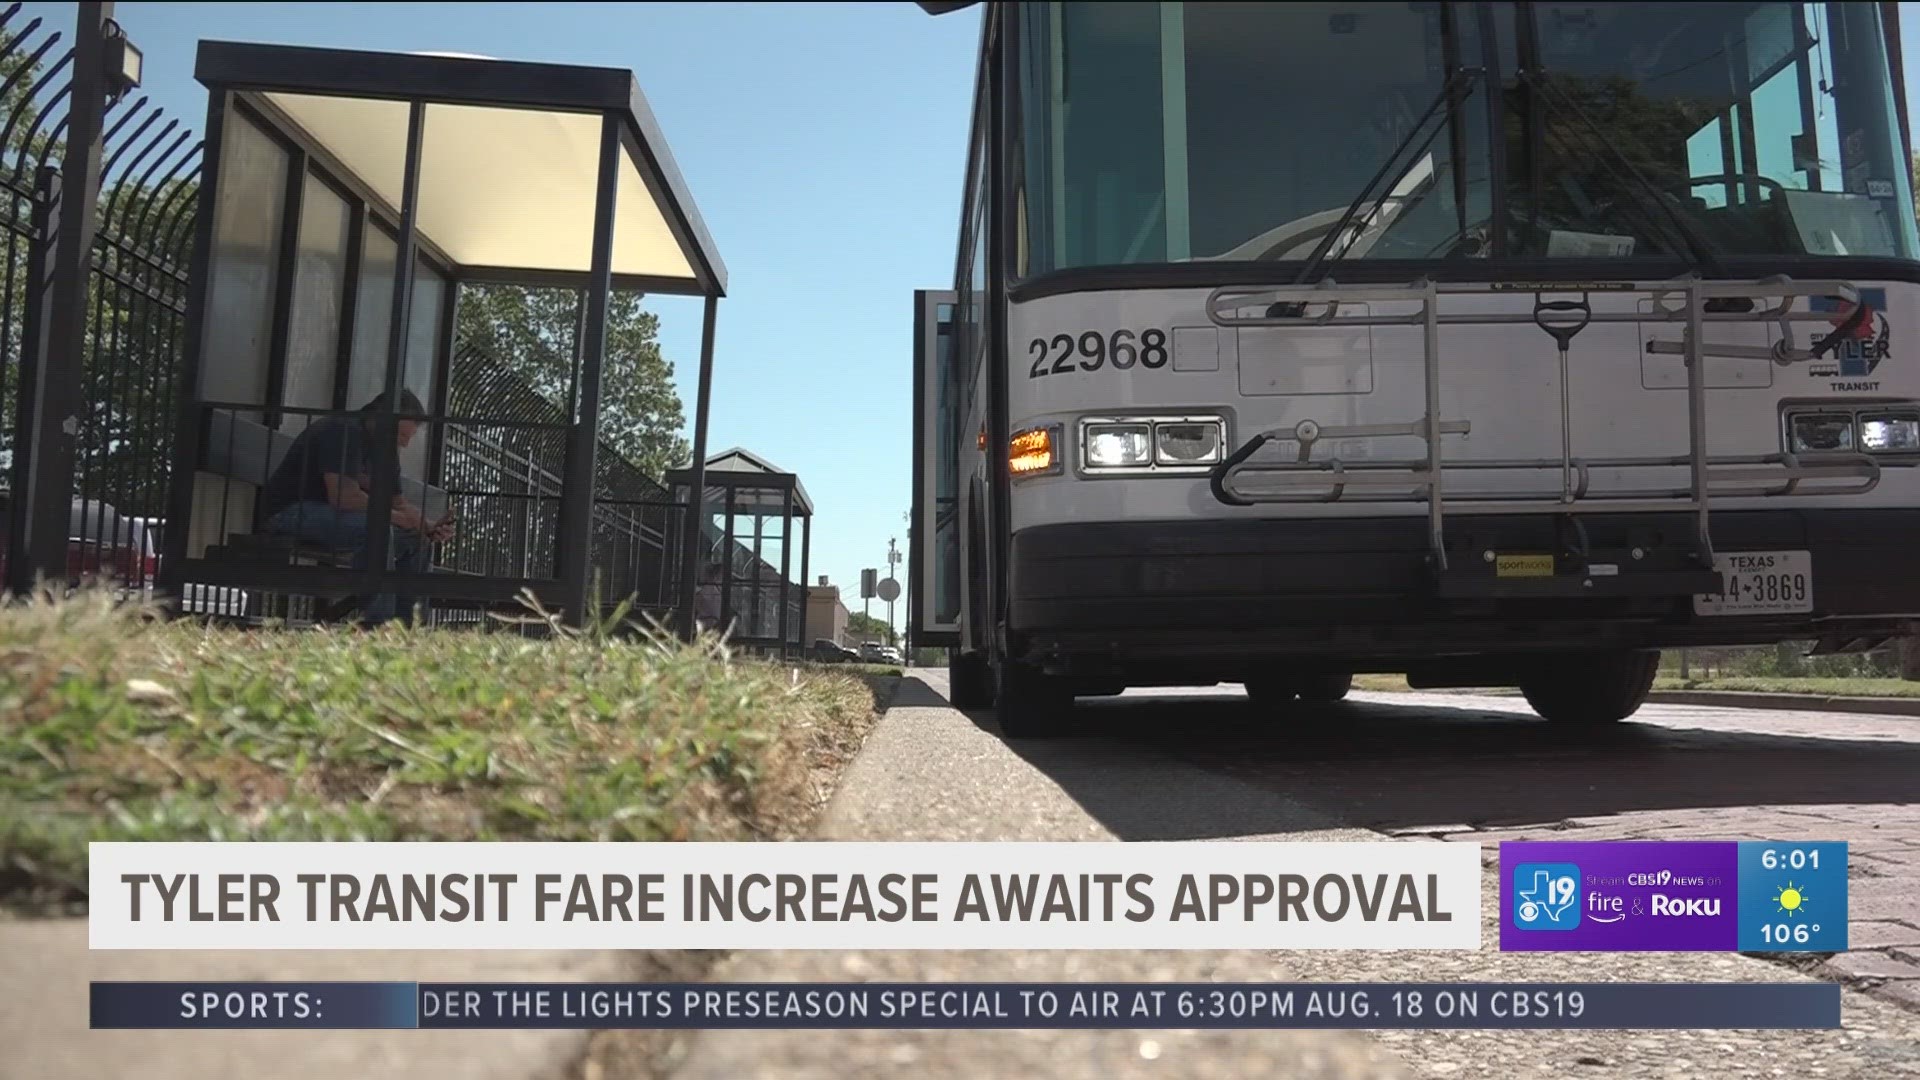 Tyler Transit fare increase awaits approval from city council